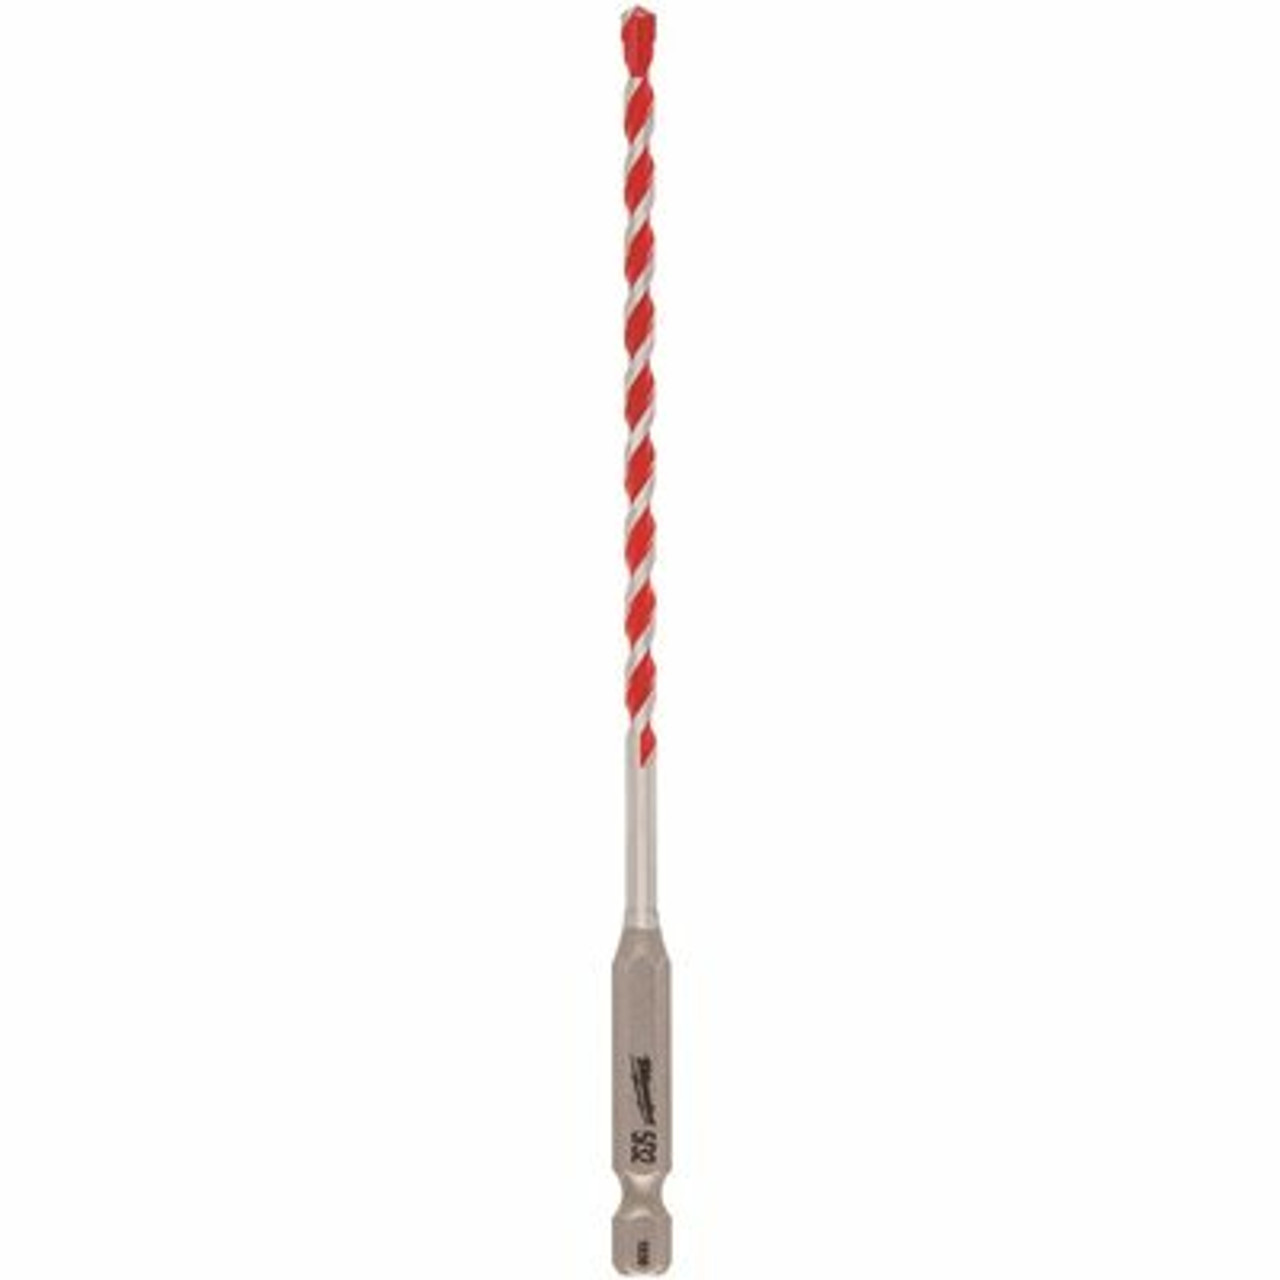 Milwaukee 5/32 In. X 4 In. X 6 In. Shockwave Carbide Hammer Drill Bit For Concrete, Stone, Masonry Drilling